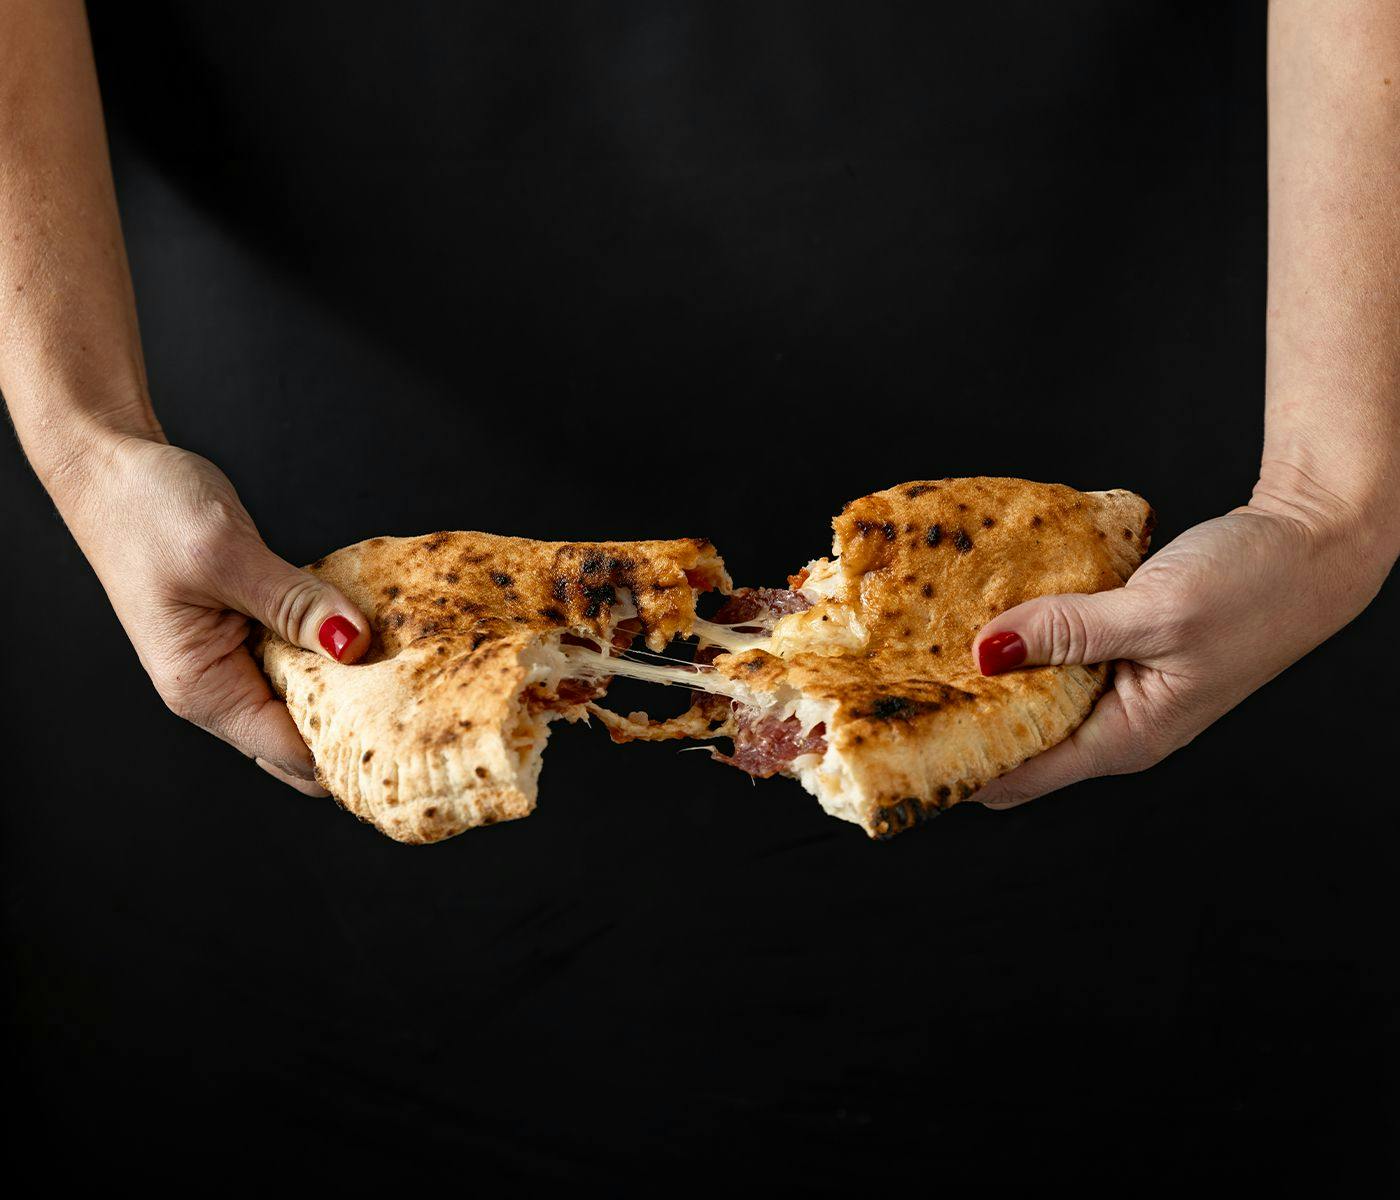 A calzone being pulled apart, oozing pepperoni and melted cheese.